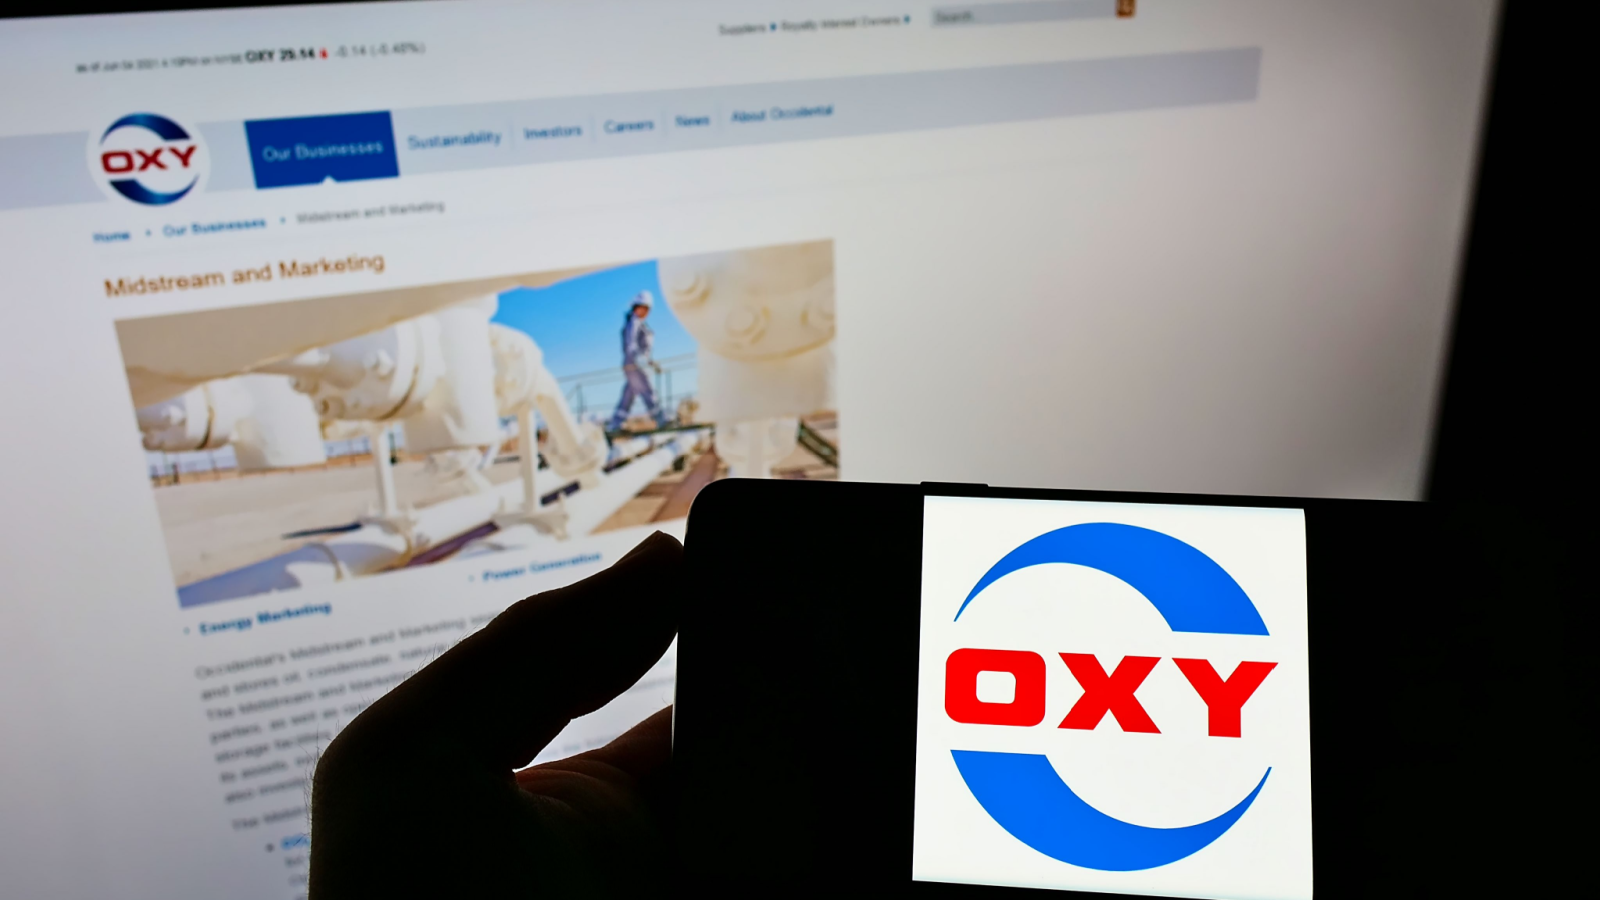 Person holding cellphone with logo of American company Occidental Petroleum Corp. (OXY) on screen in front of website. Focus on phone display. Unmodified photo.